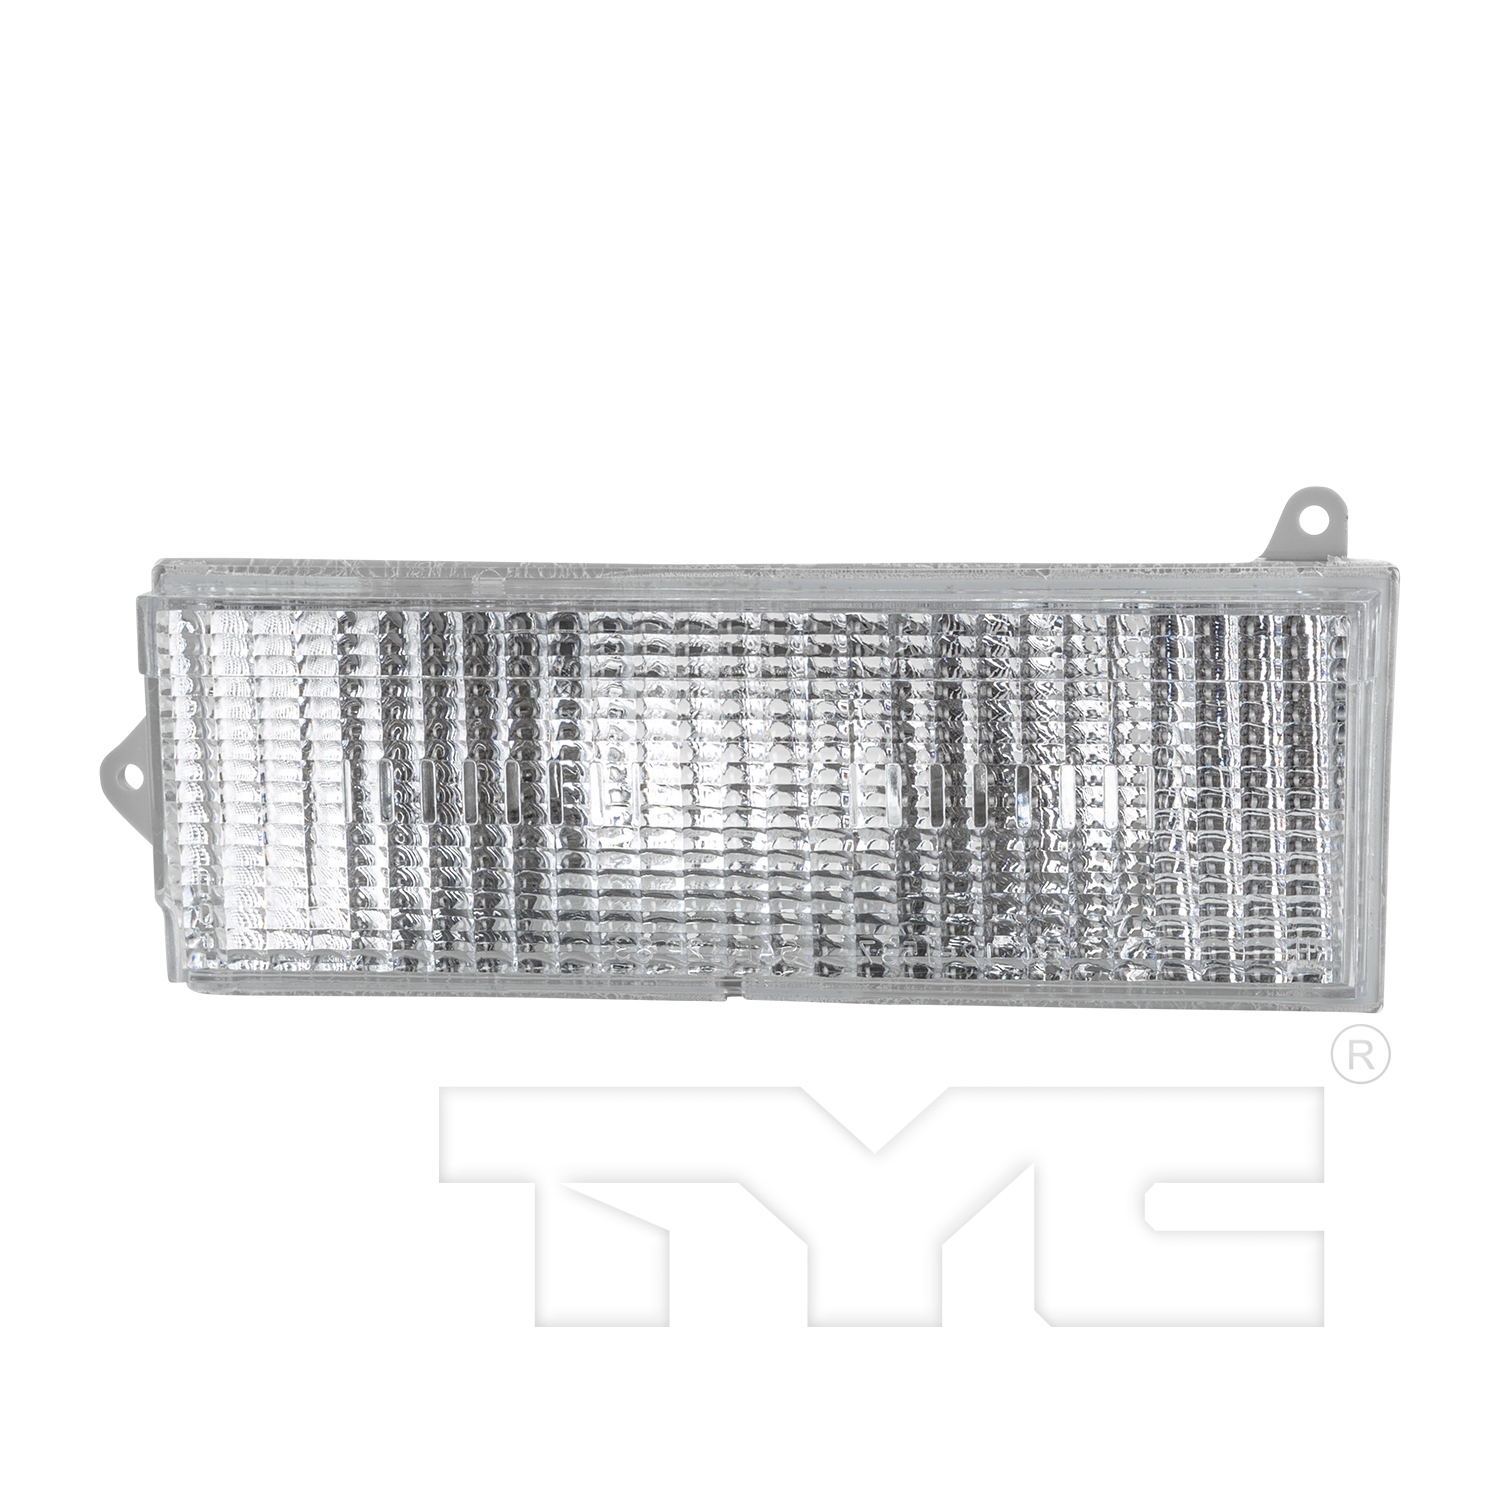 Aftermarket LAMPS for JEEP - WAGONEER, WAGONEER,84-90,LT Front signal lamp